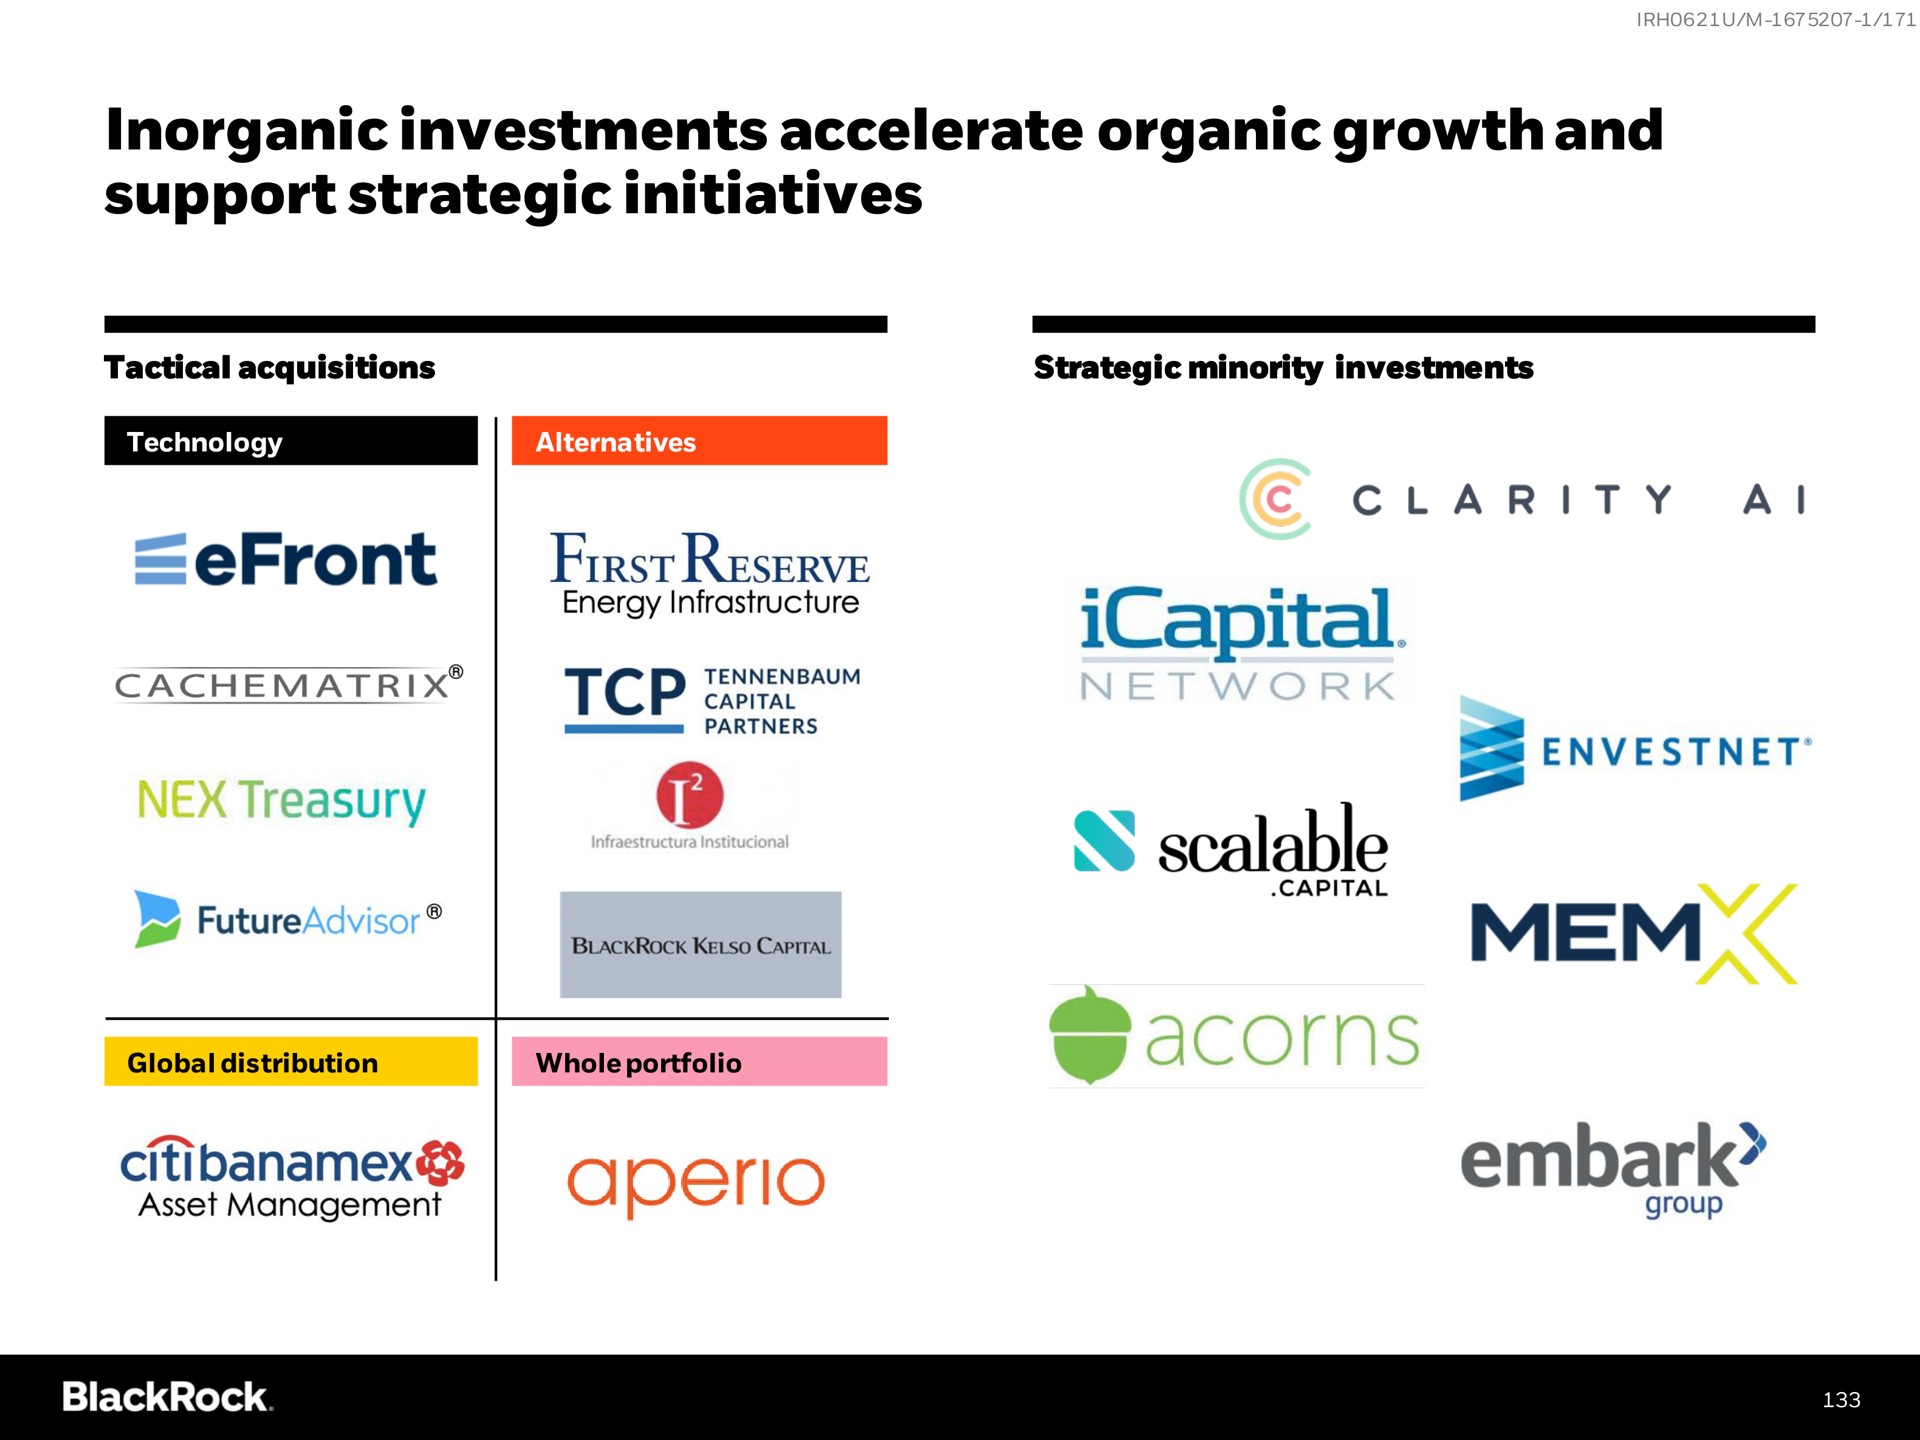 inorganic investments accelerate organic growth and support strategic initiatives panned mem | BlackRock